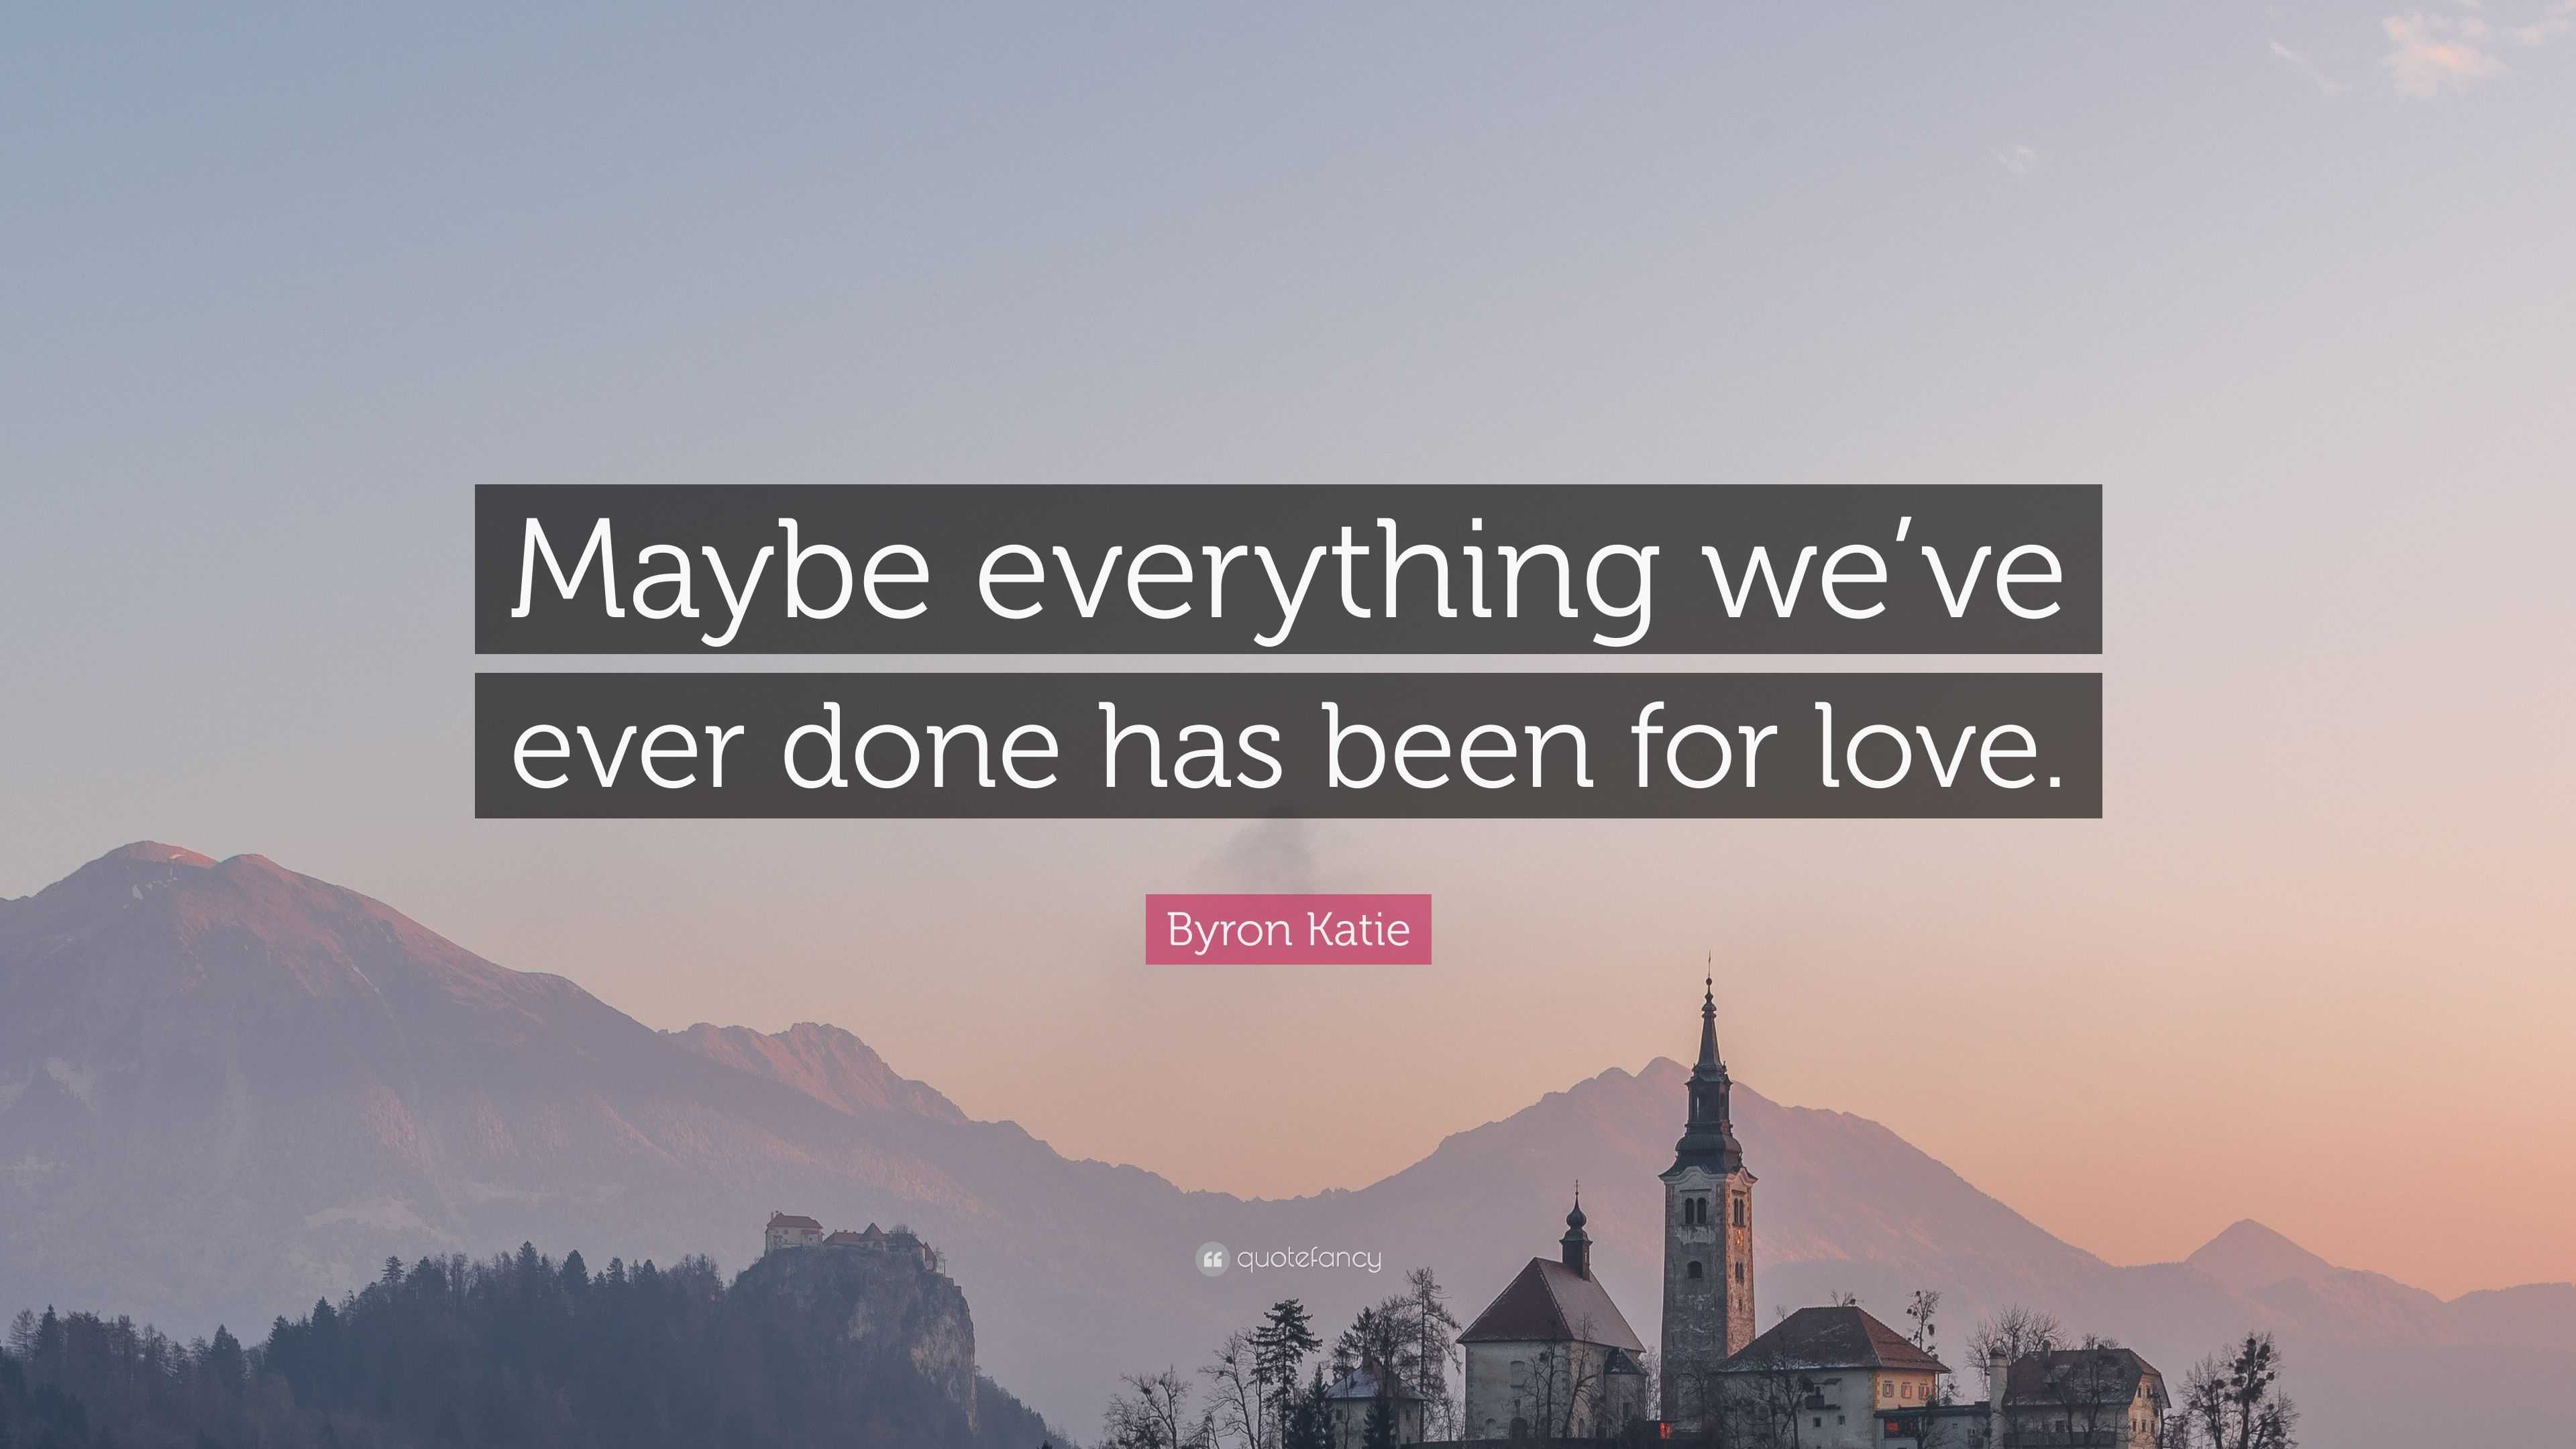 Byron Katie Quote: "Maybe everything we've ever done has been for love." (7 wallpapers) - Quotefancy